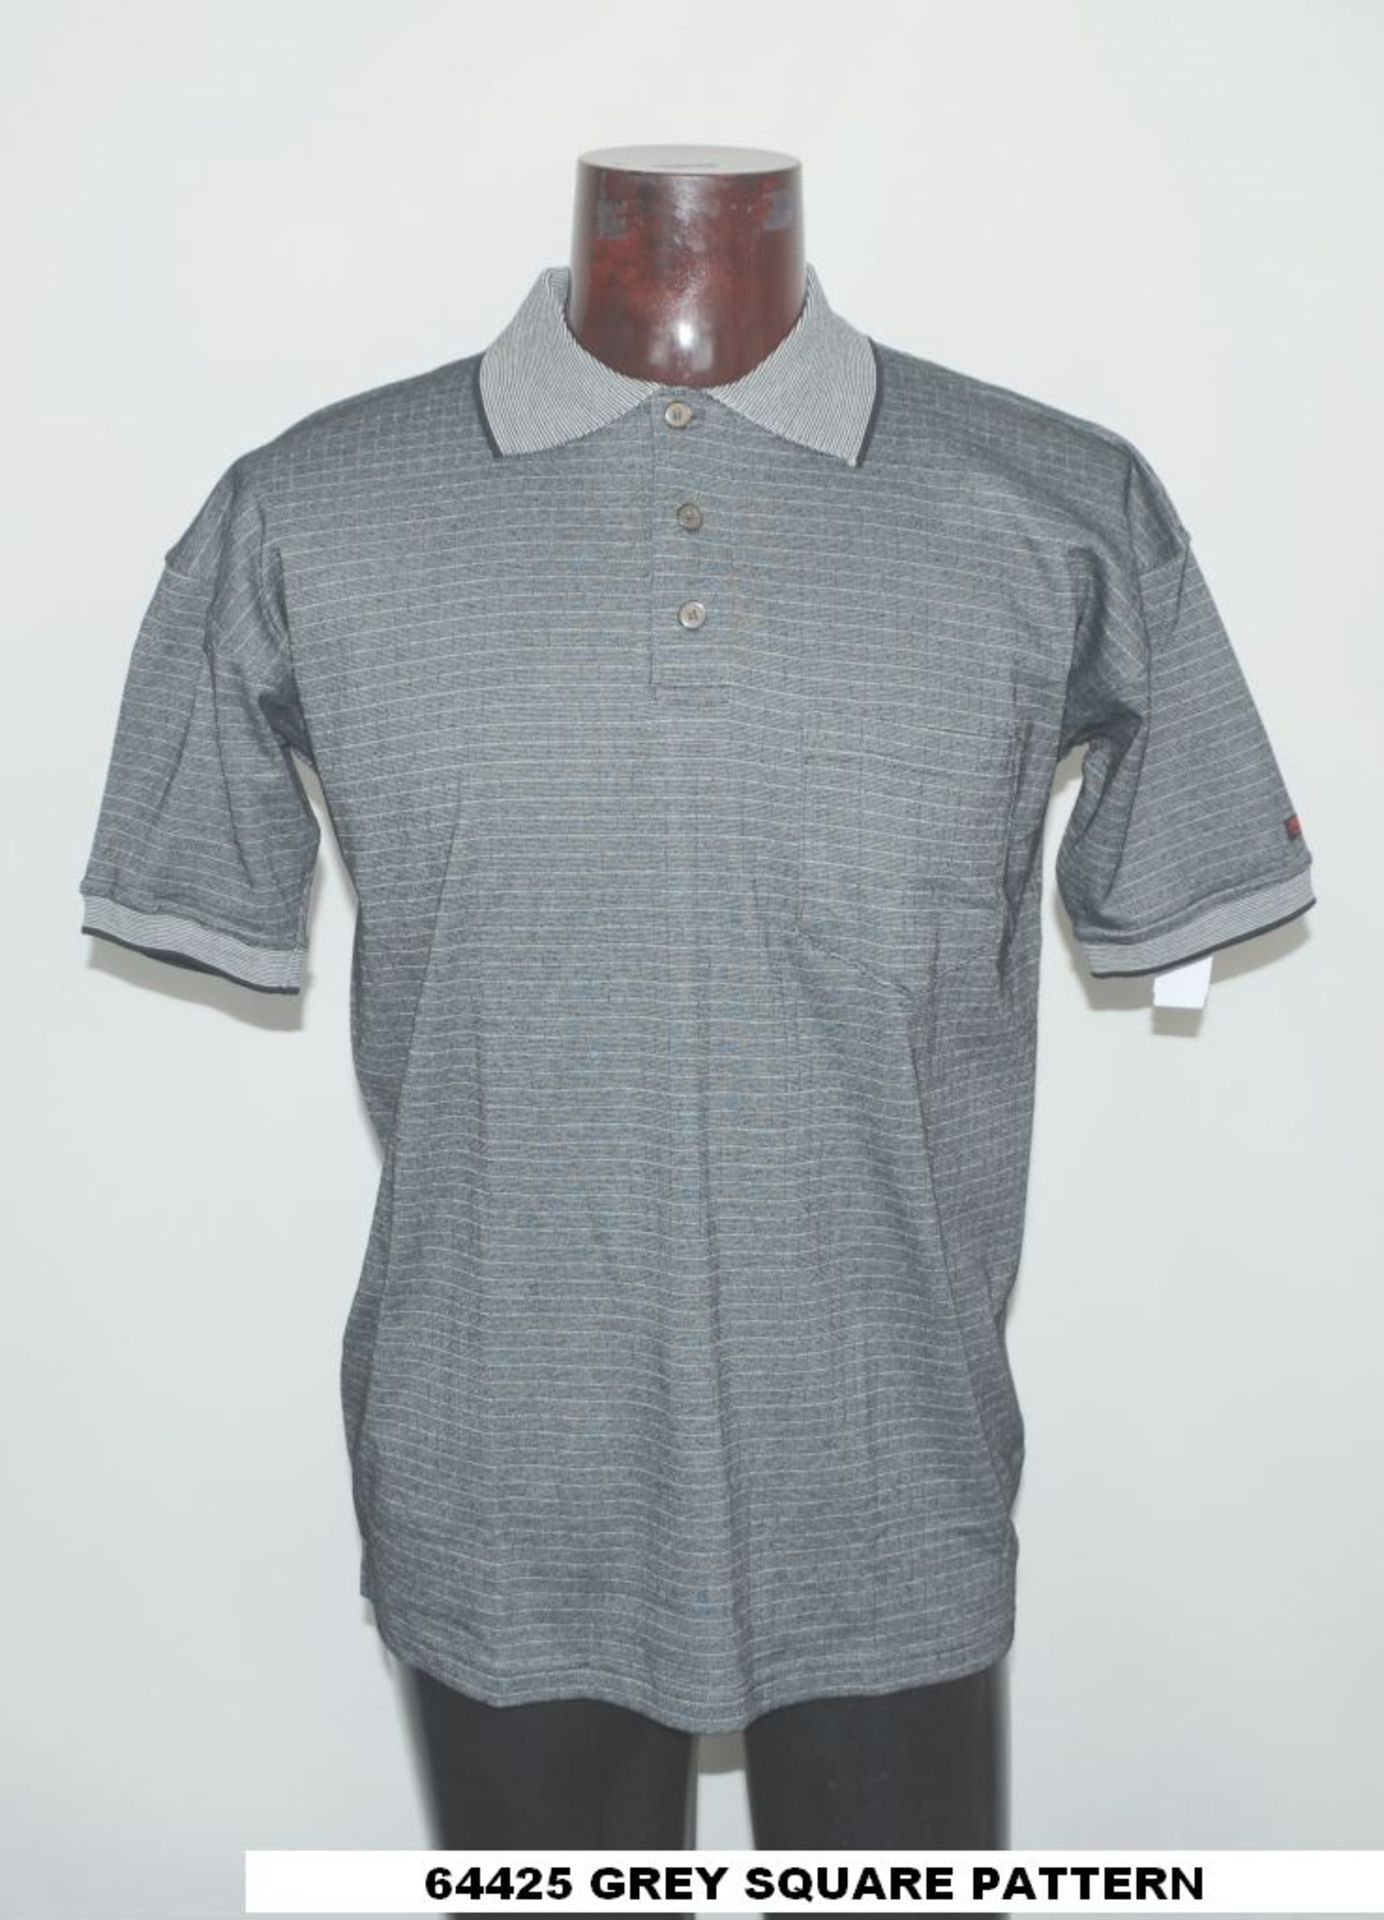 157 x Polo / Grey square pattern / 64425 GY